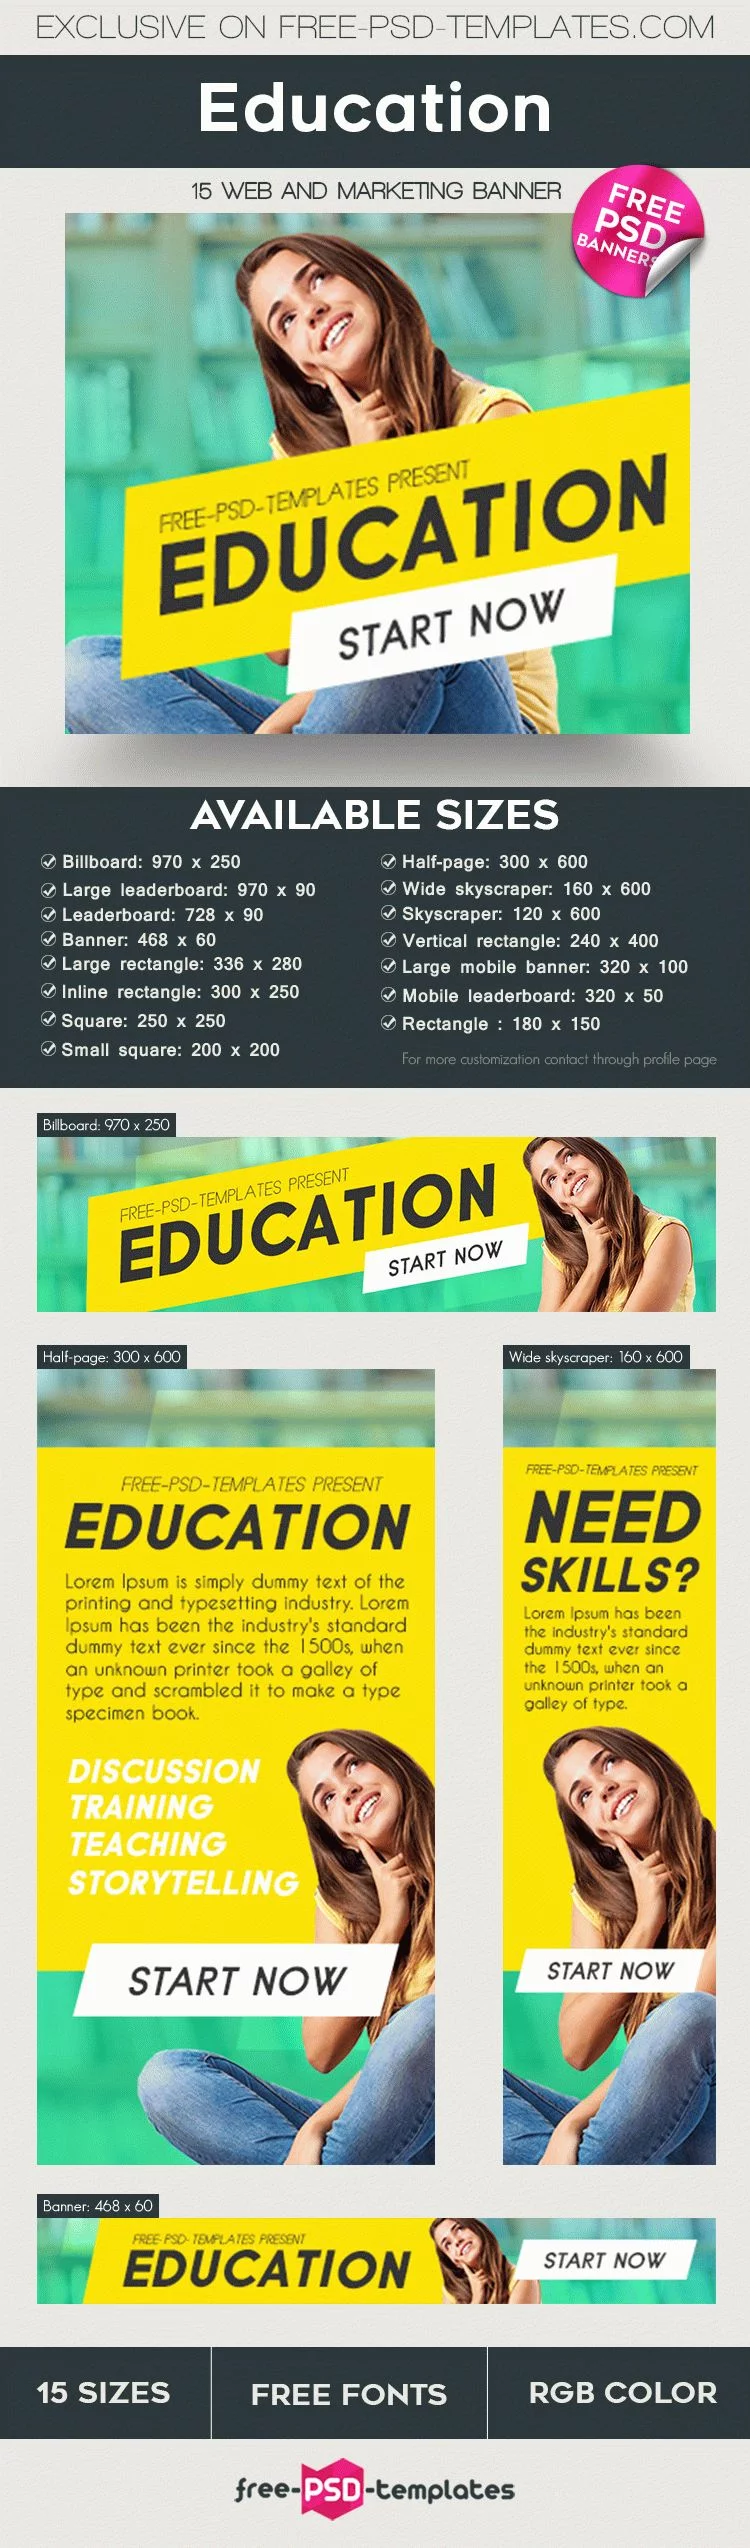 15 Free Education Banners Collection in PSD